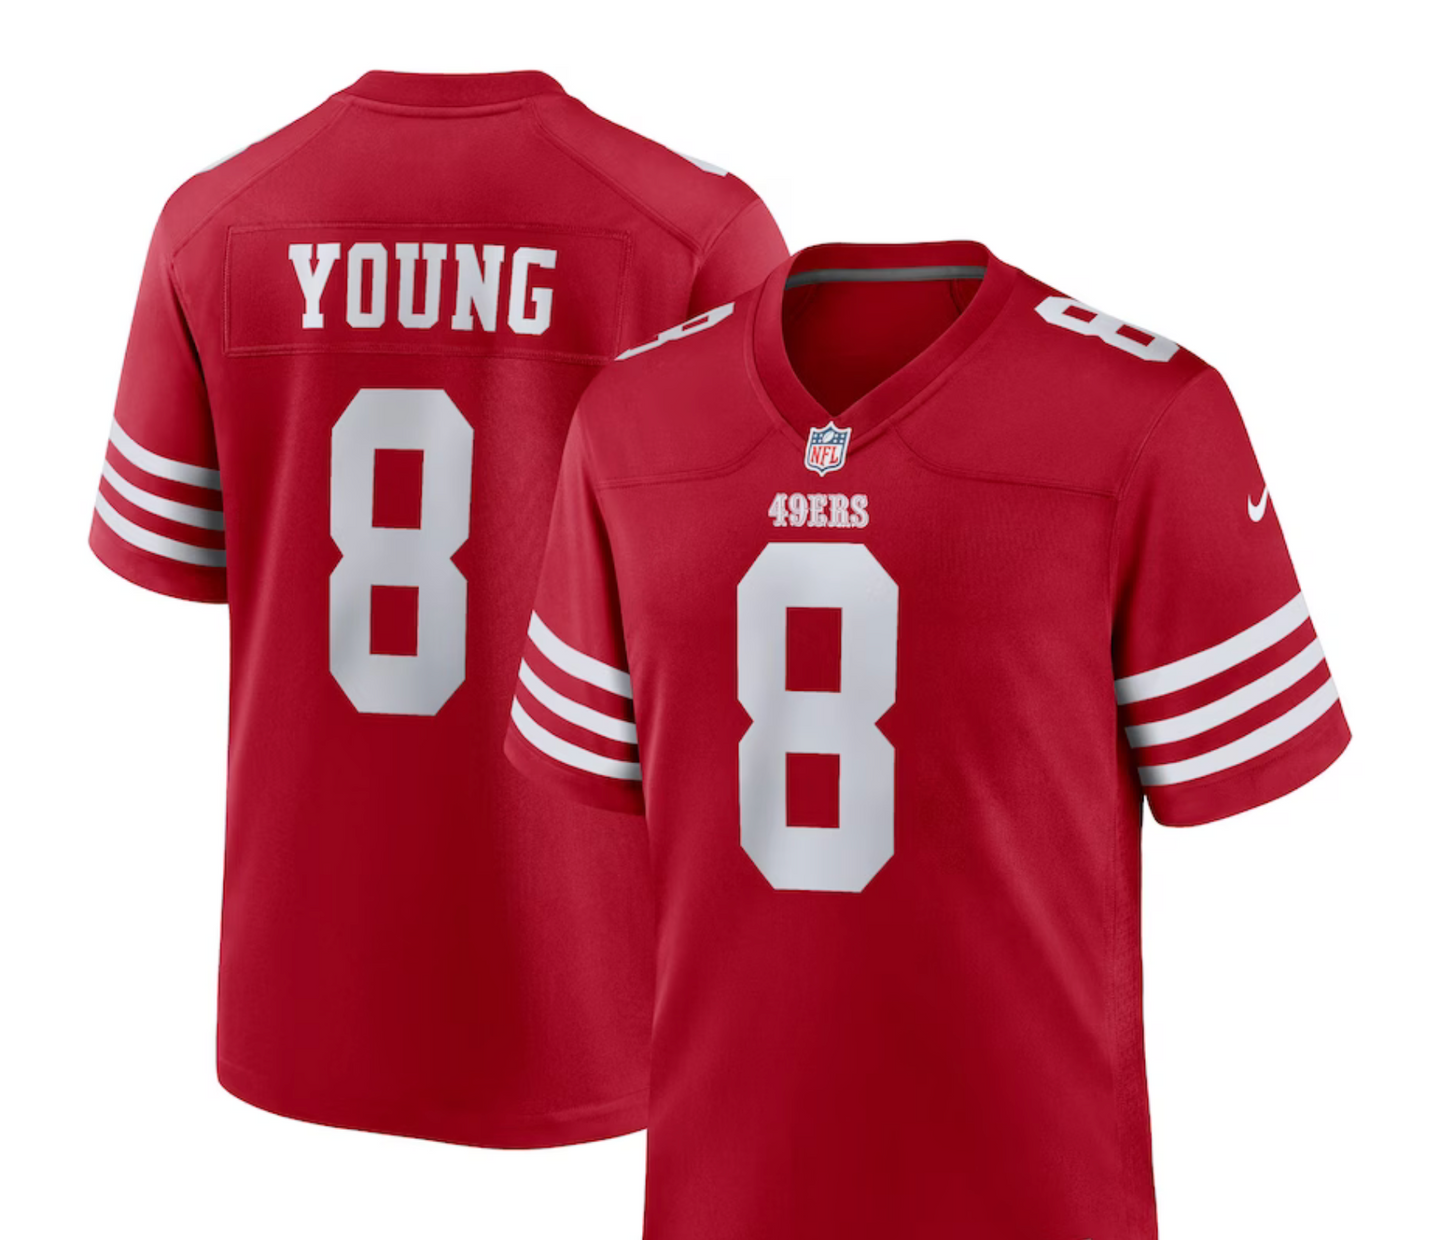 San Francisco 49ers Steve Young jersey